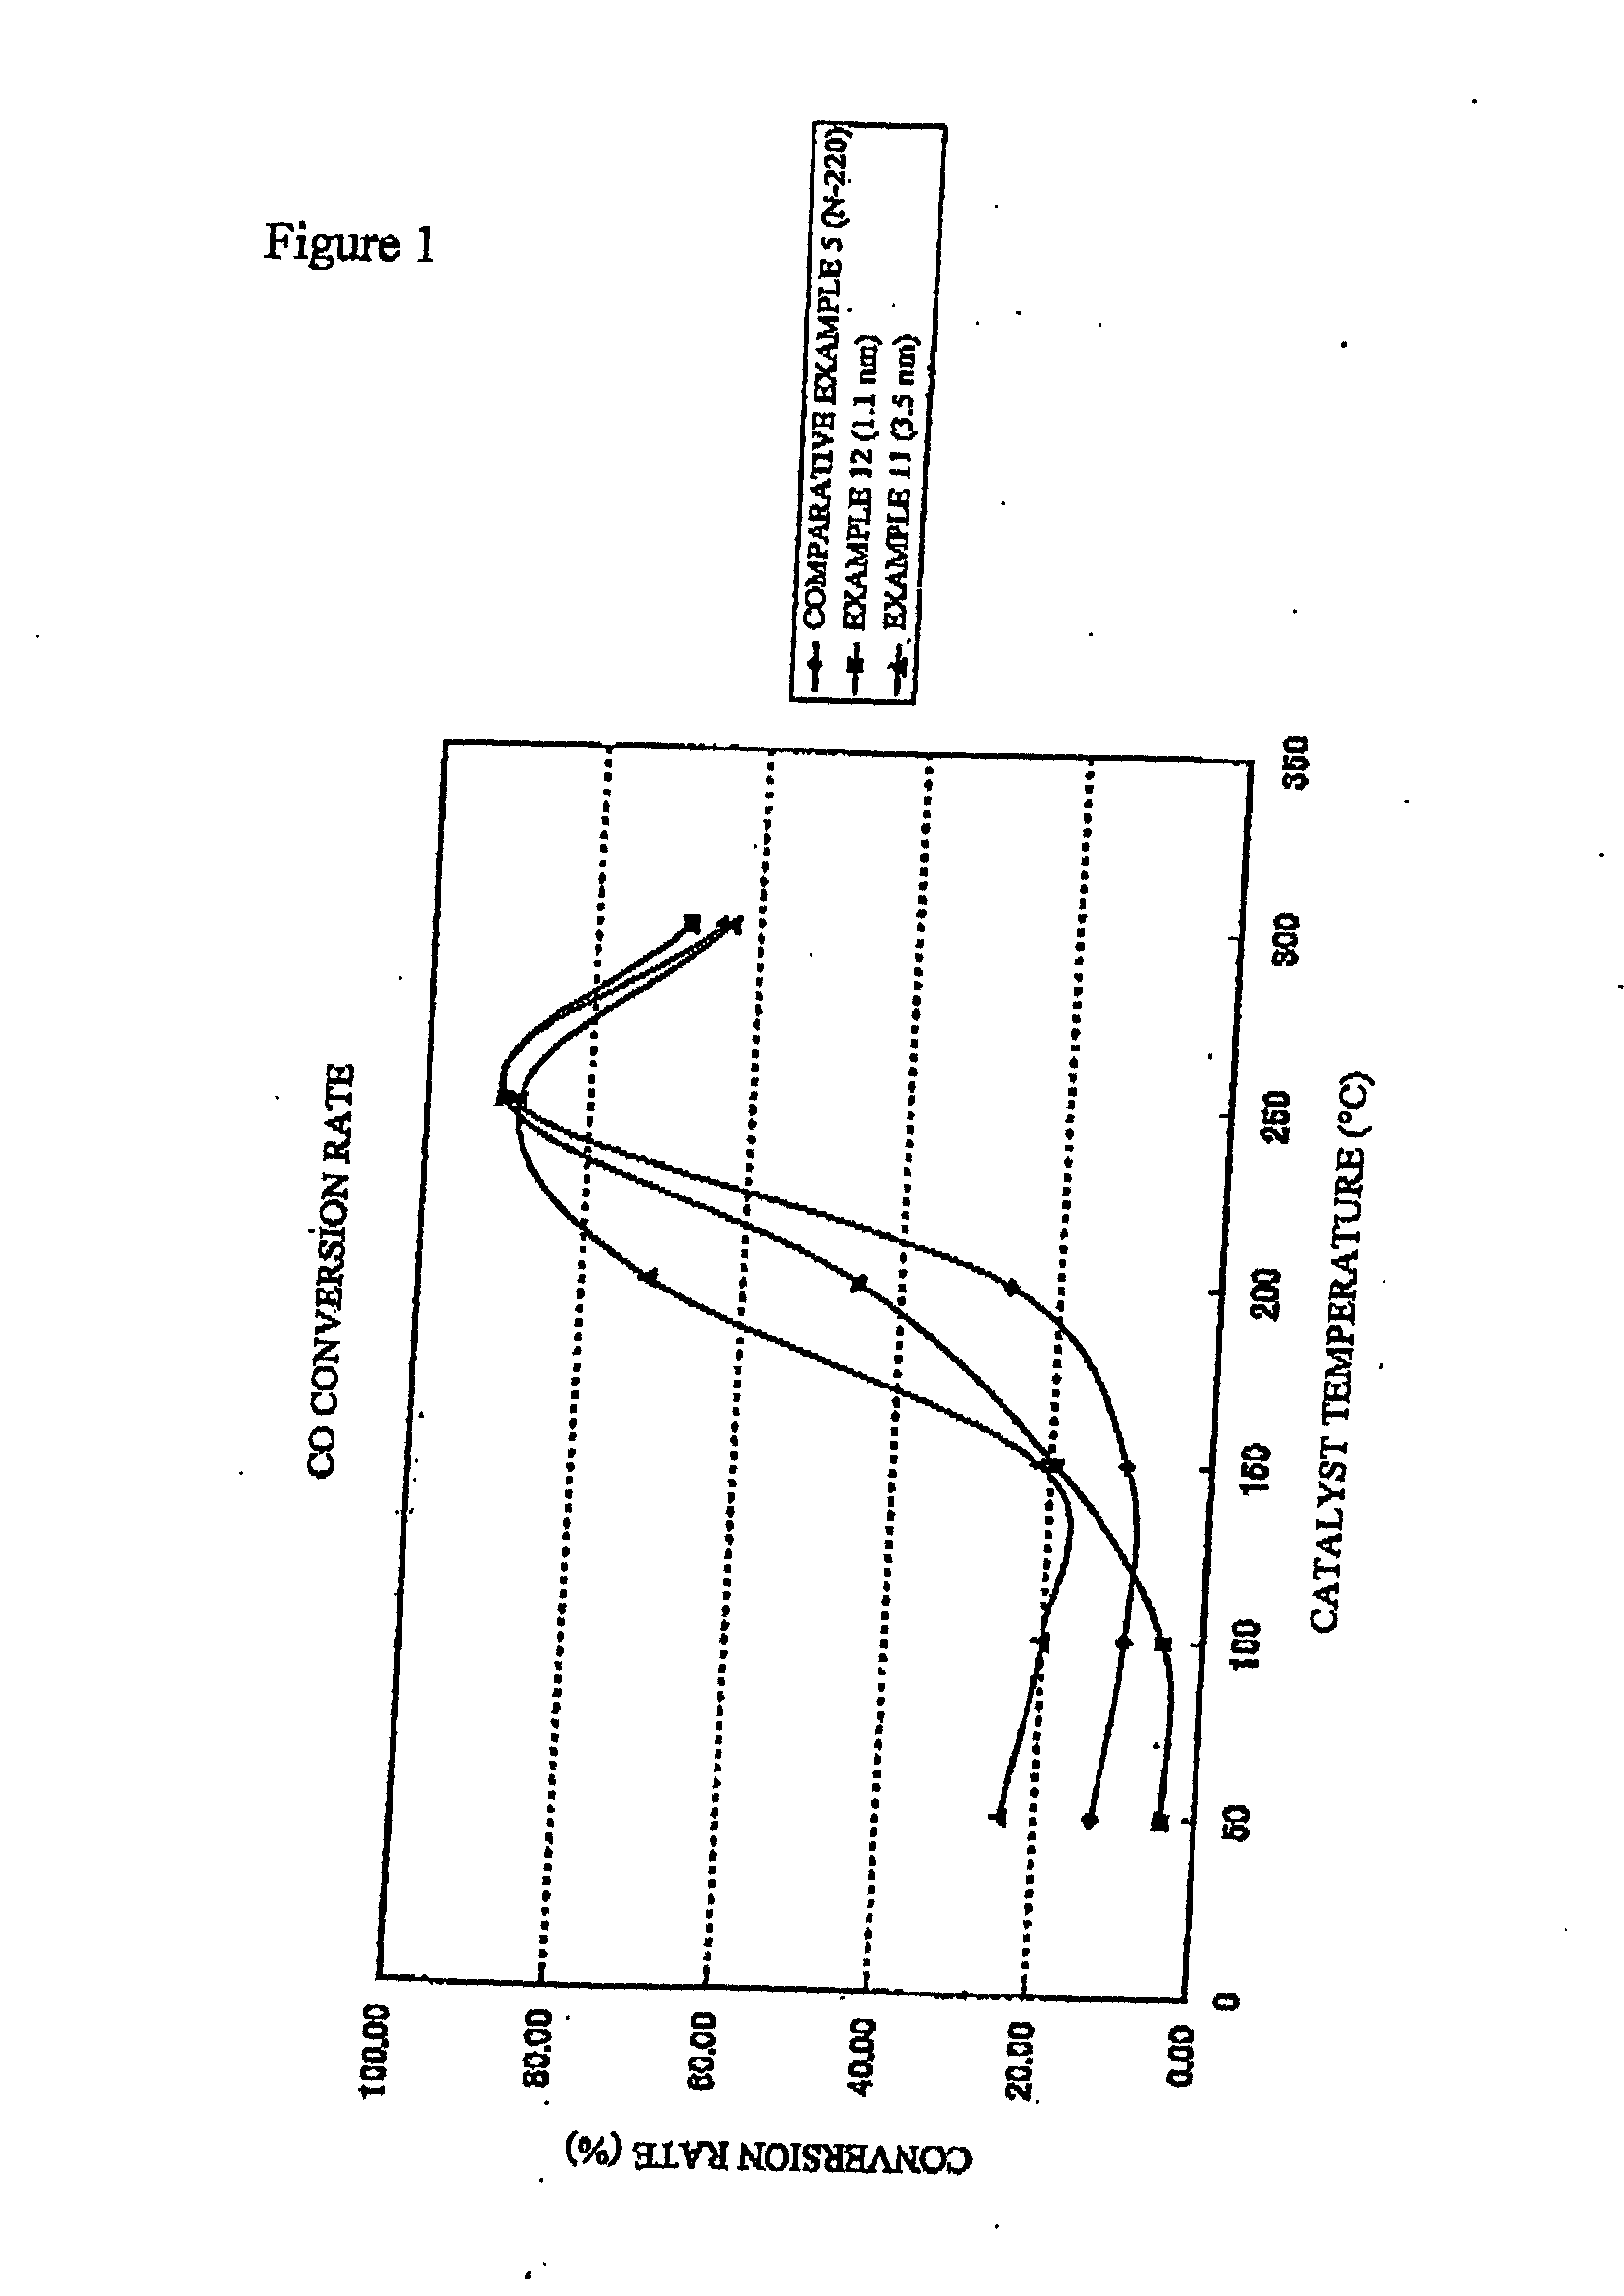 Method for preparing colloidal solution and carrier having colloidal particles fixed on surface thereof, fuel cell cathode, fuel cell anode and method for preparing the same and fuel cell using the same, and low temperature oxidation catalyst, method for preparing the same and fuel cell fuel modifying device using the same